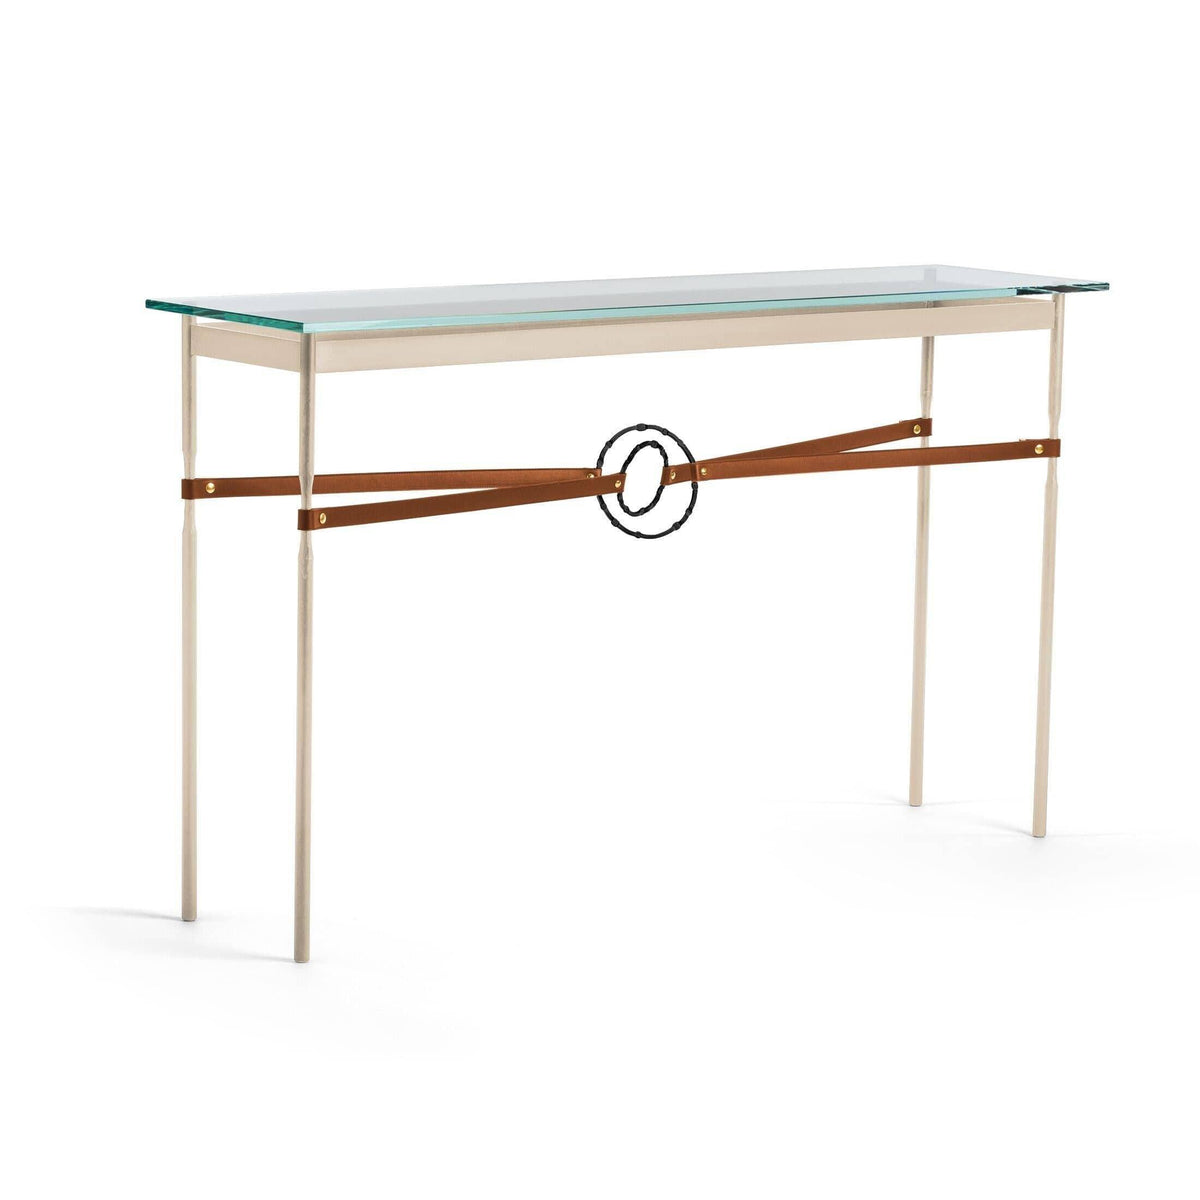 Hubbardton Forge - Equus Chestnut Leather Console Table - 750118-84-10-LC-VA0714 | Montreal Lighting & Hardware